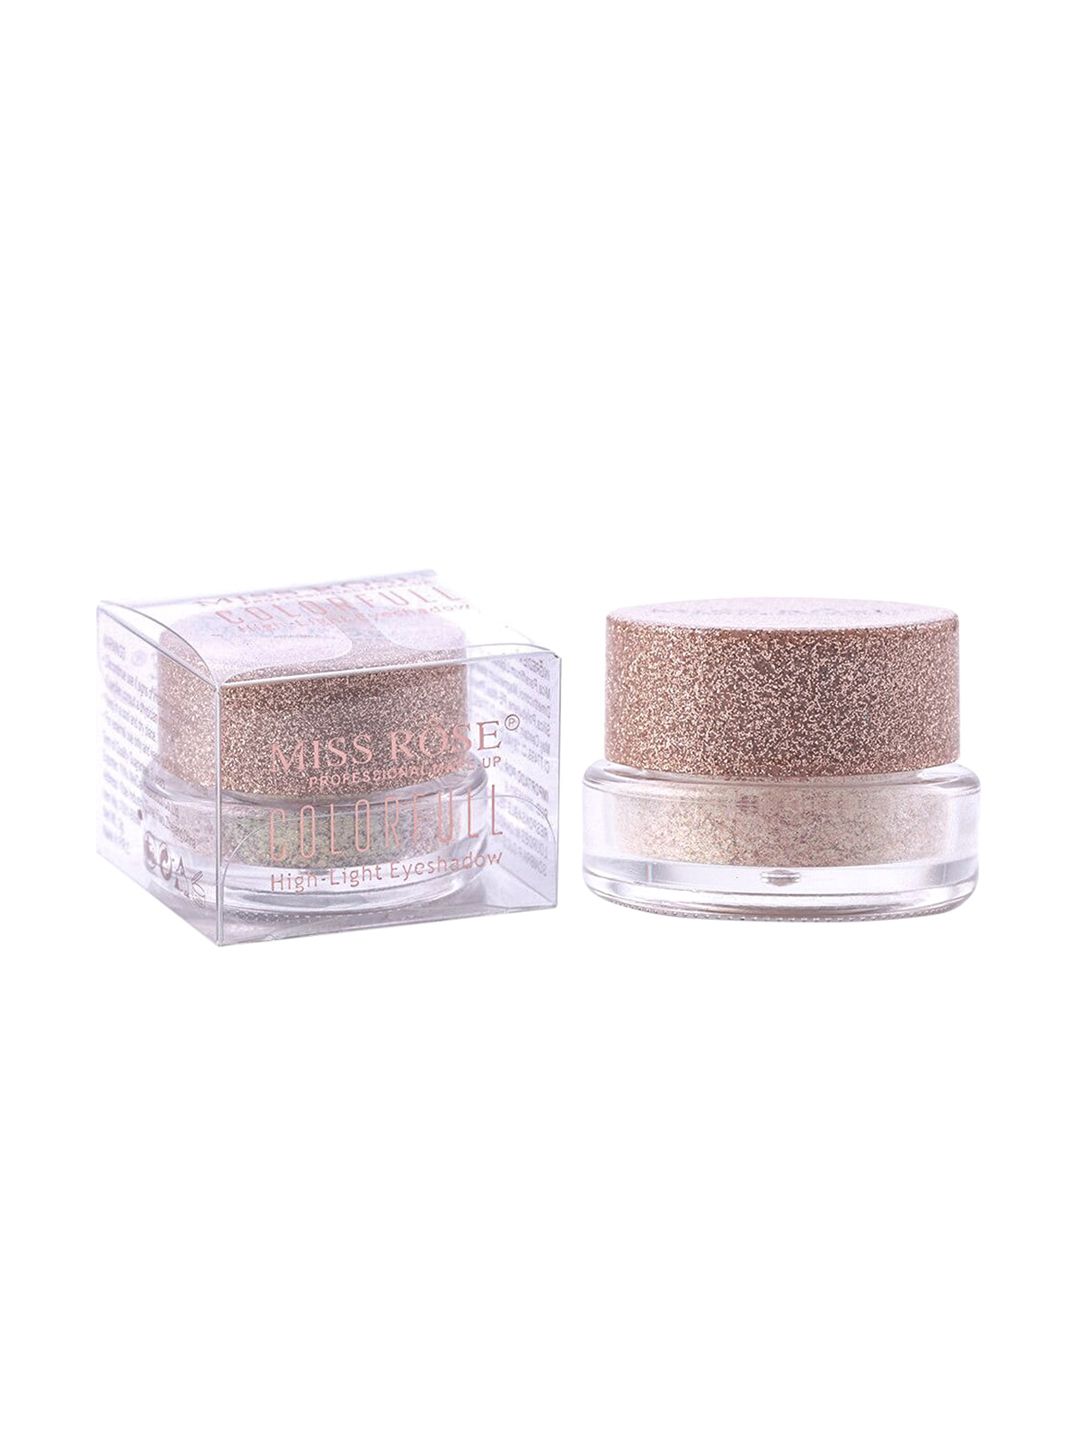 MISS ROSE Single Glitter Eyeshadow - Eleven 7001-005M 13 Price in India